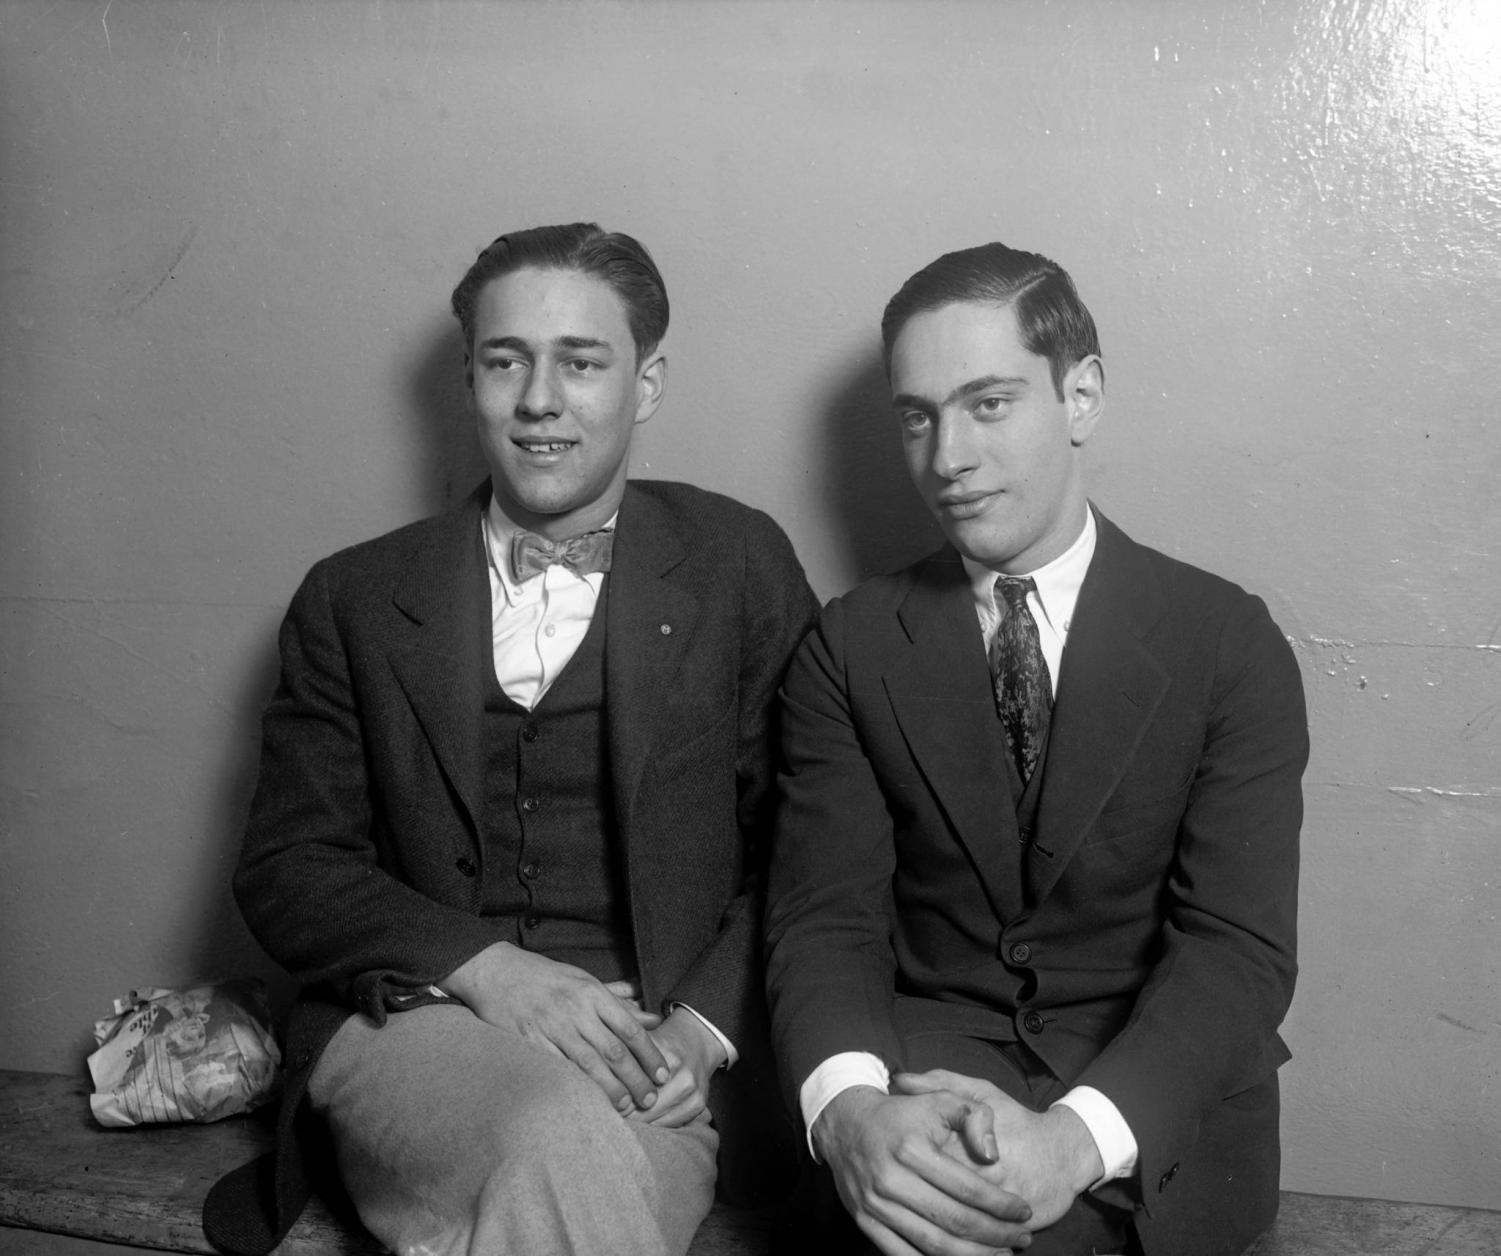 case study 5 the case of leopold and loeb (1924)